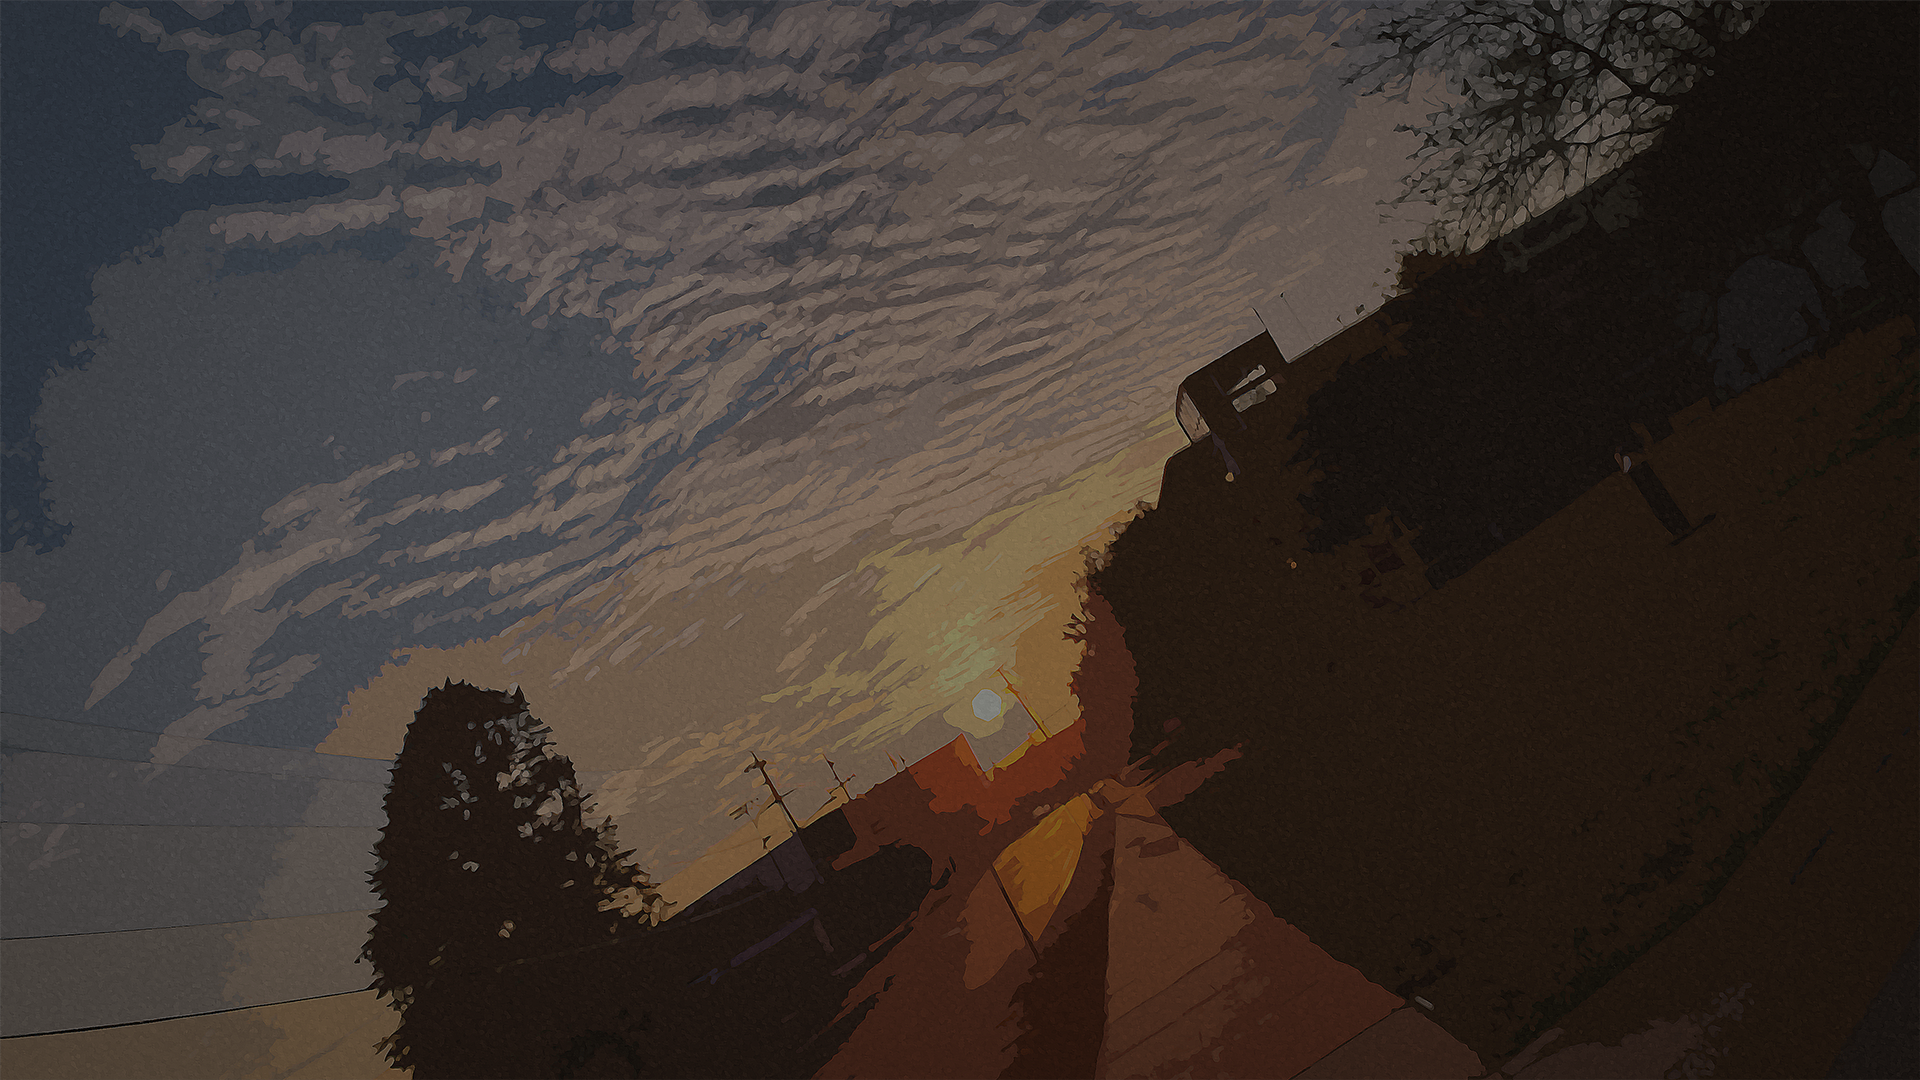 Background image: A photographic scene of dusk with the sun setting on the horizon. The image is dimmed and blurred for page readability